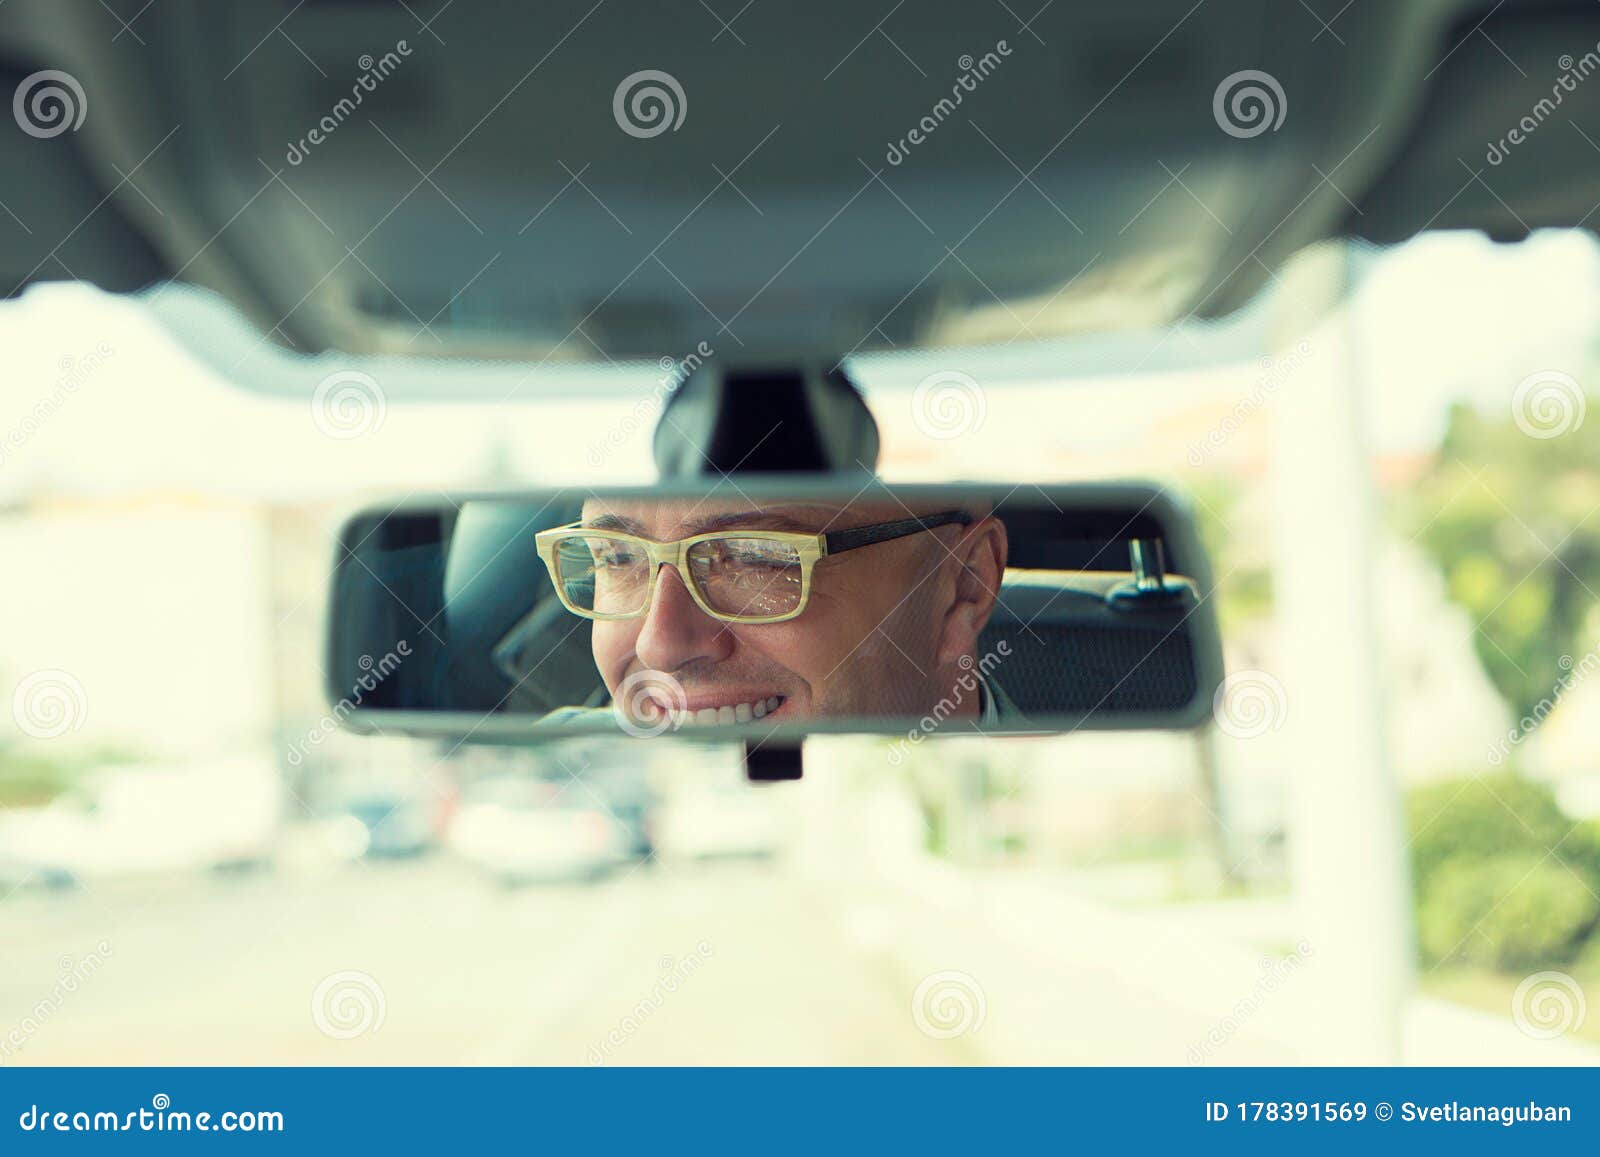 Happy With My Car Choice Portrait Young Man Driver Reflection In Car Rear View Mirror Stock Image Image Of Back Accident